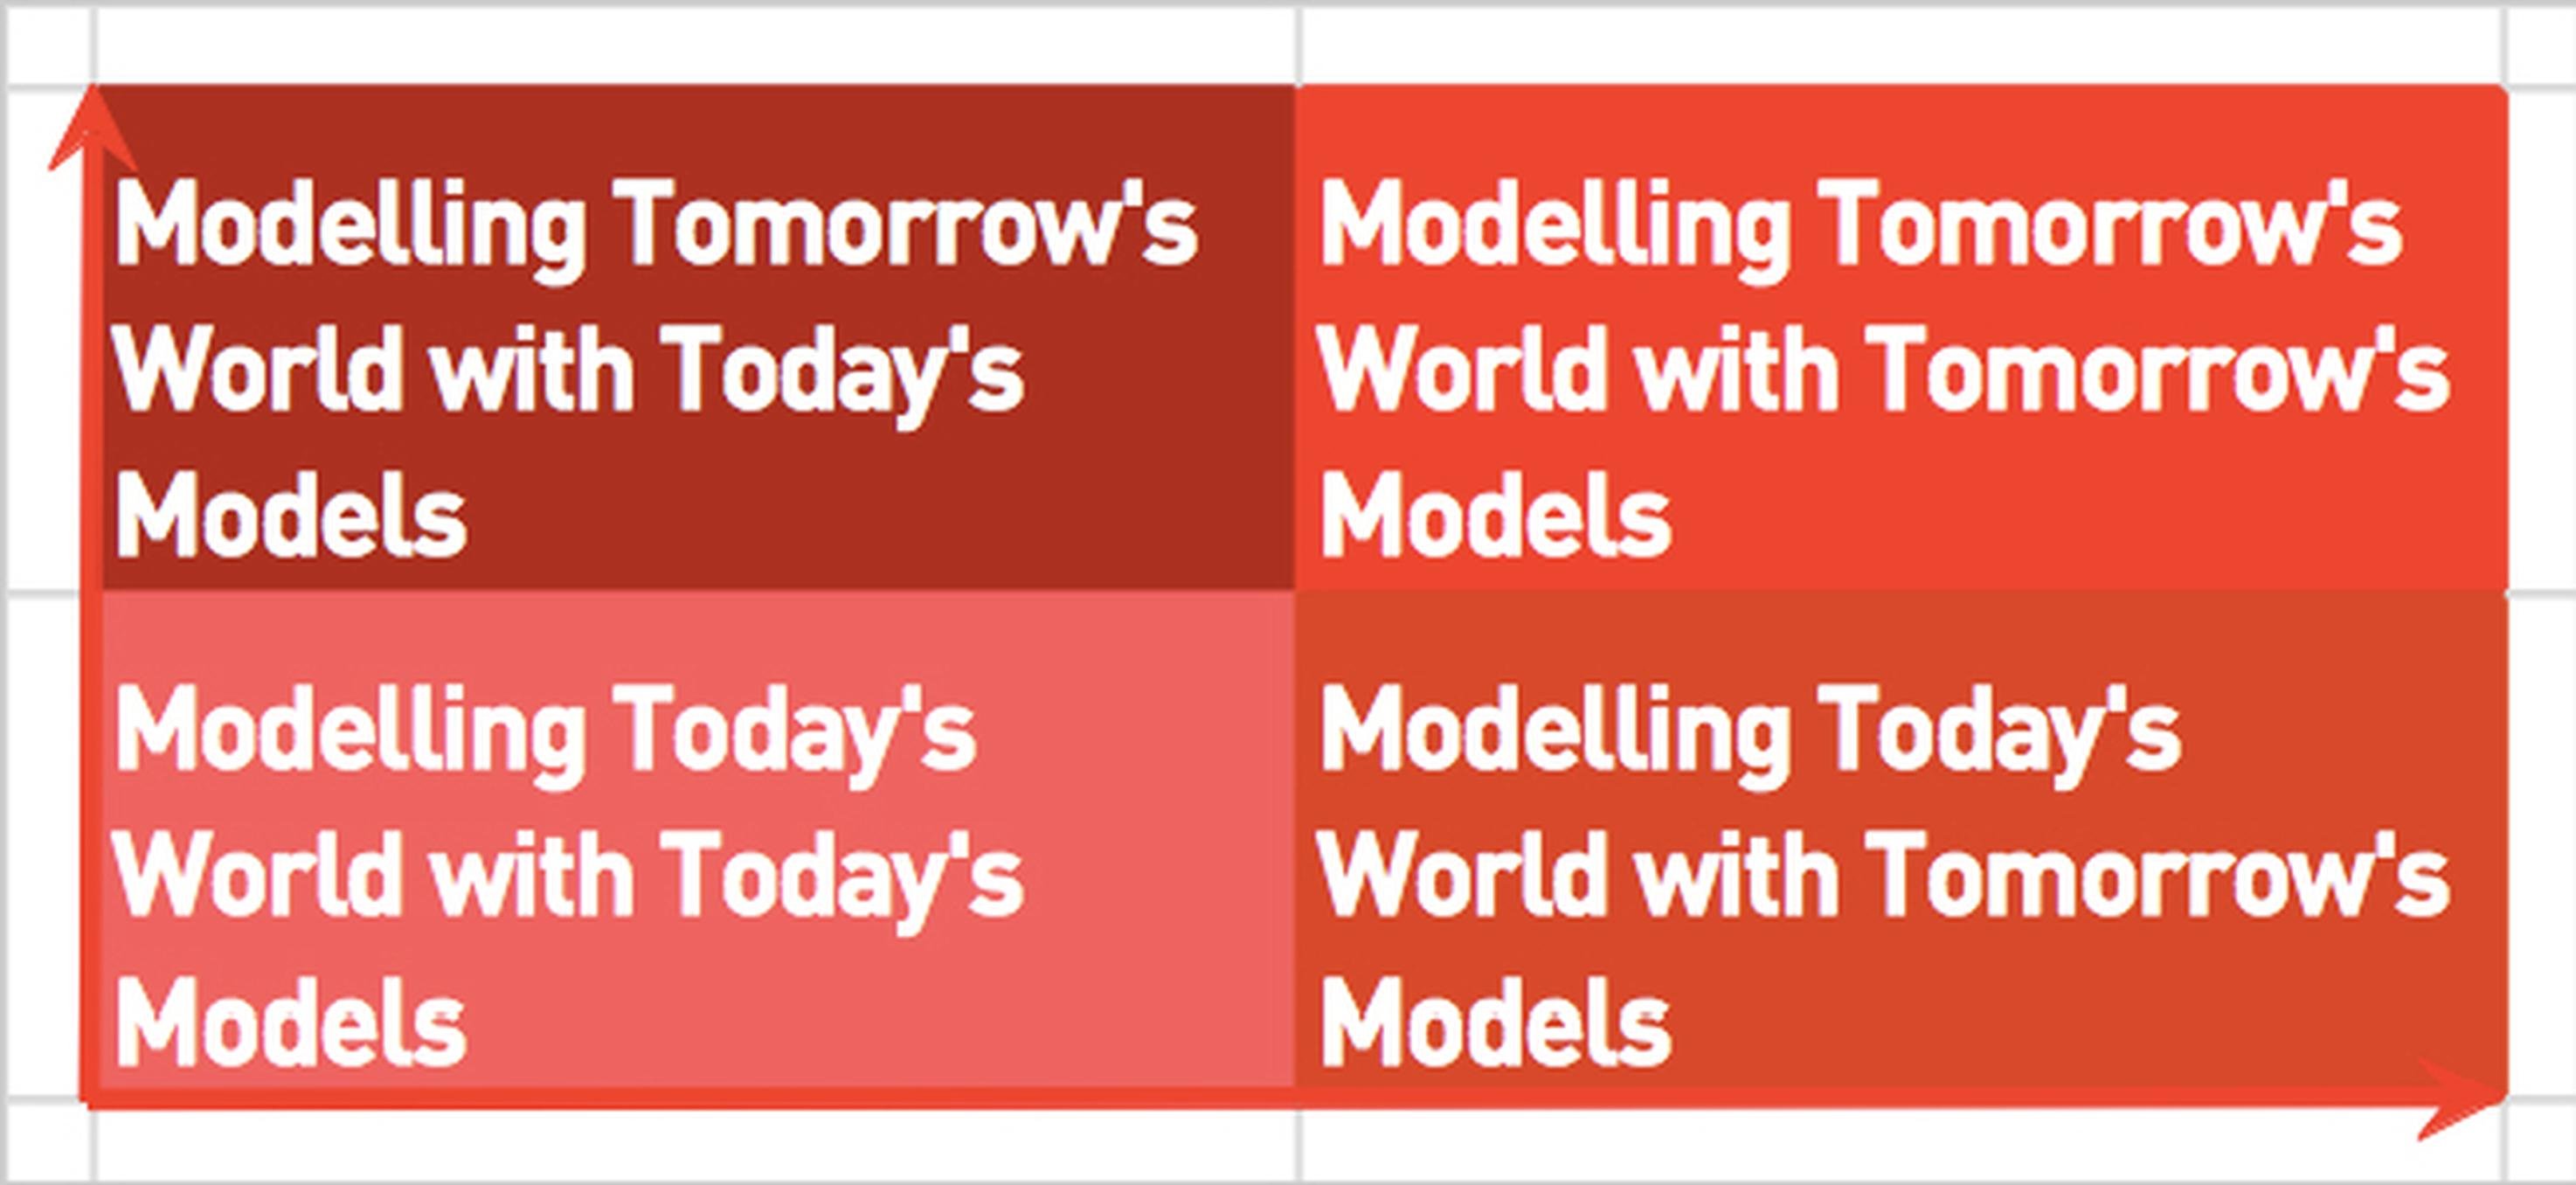 Modelling Tomorrow's World: four perspectives